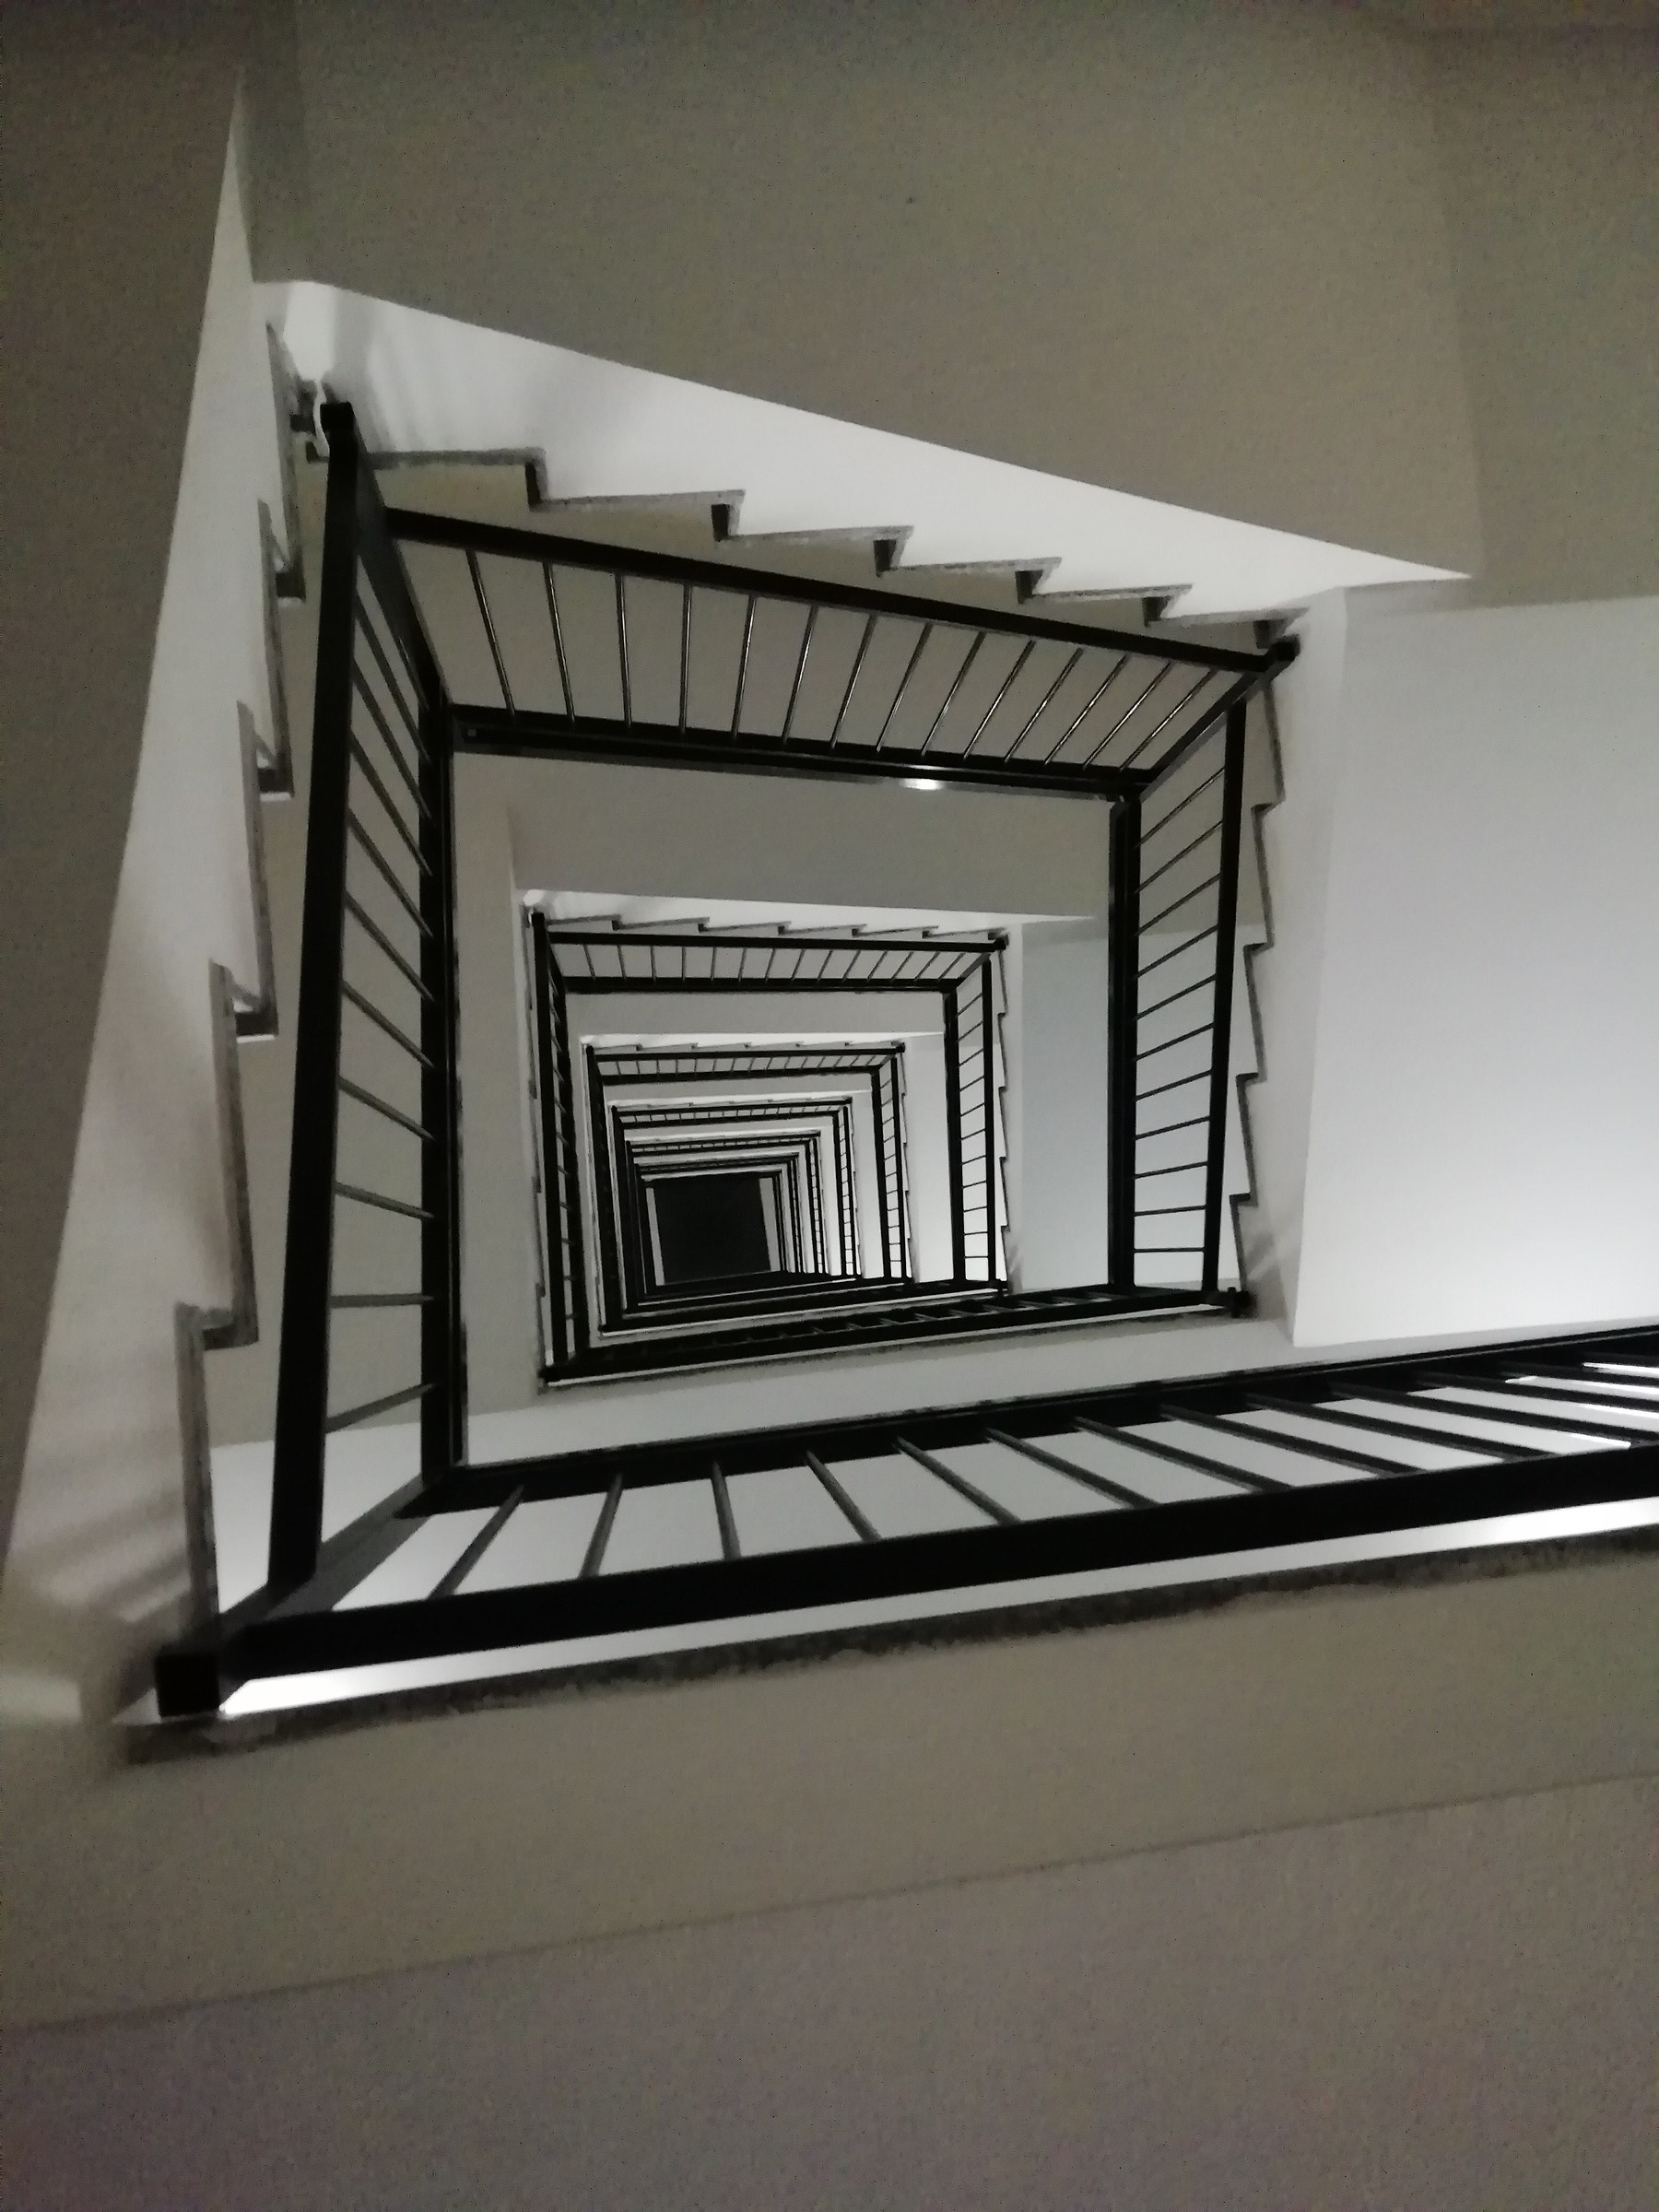 Perspective of a ladder ...